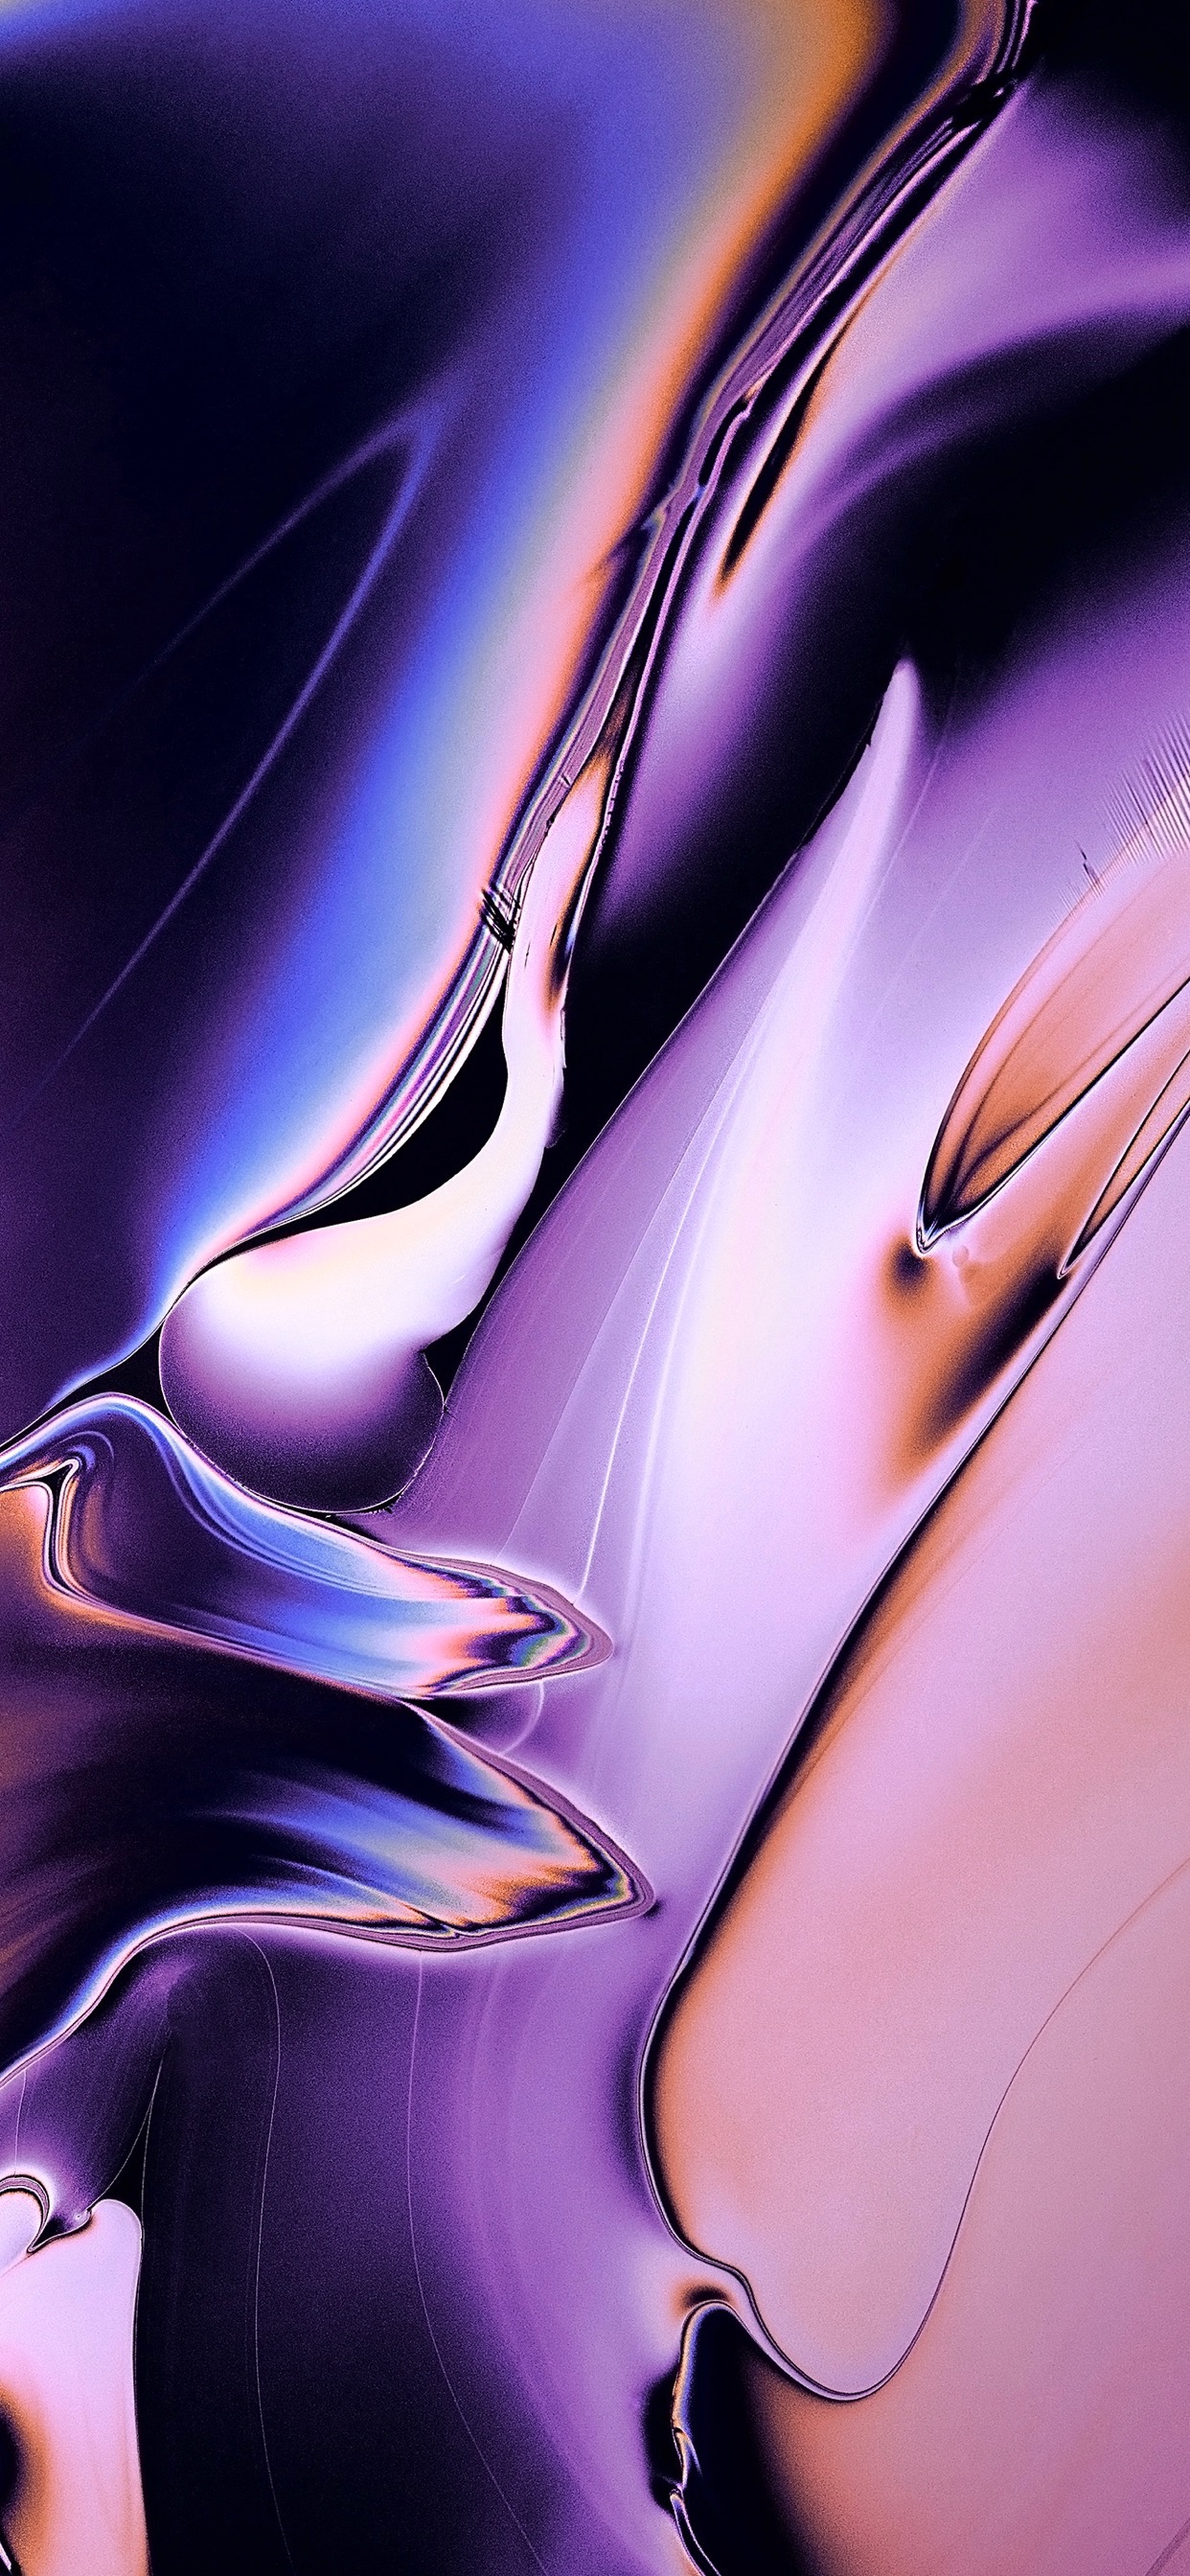 Wallpaper Weekends: Abstract iPhone Wallpapers From the macOS Desktop Pictures Folder